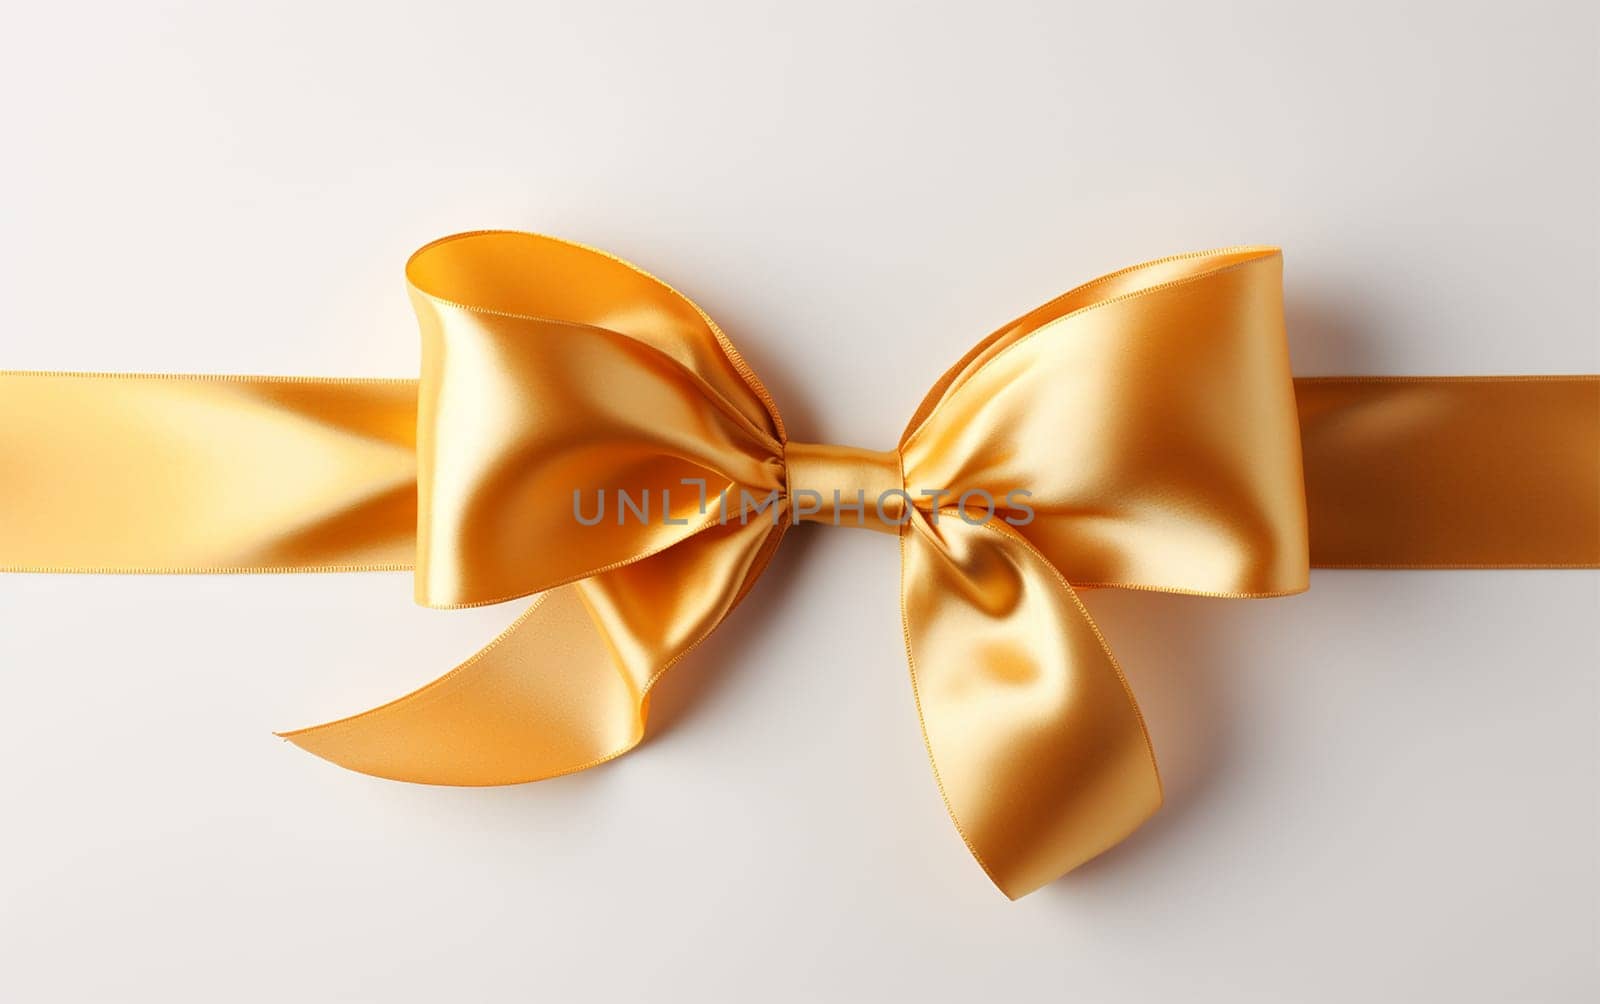 Shiny color satin ribbon on white background. Christmas gift, valentines day, birthday wrapping element. Decorative golden bow with long ribbon isolated Festive